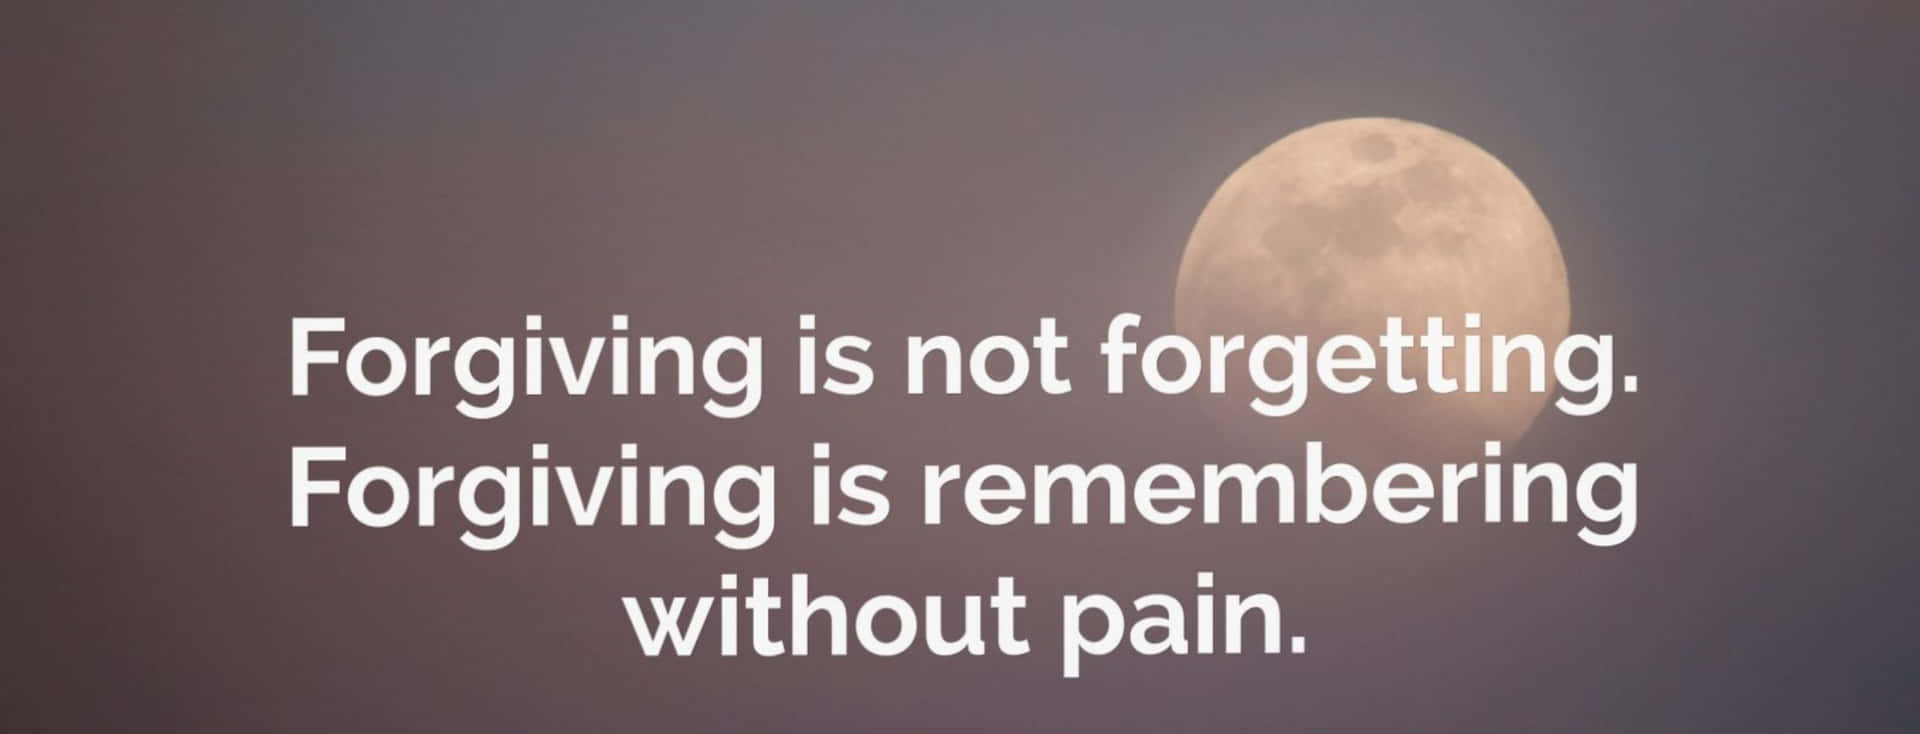 Forgiveness Is Not Forgetting Forgiveness Is Remembering Without Pain